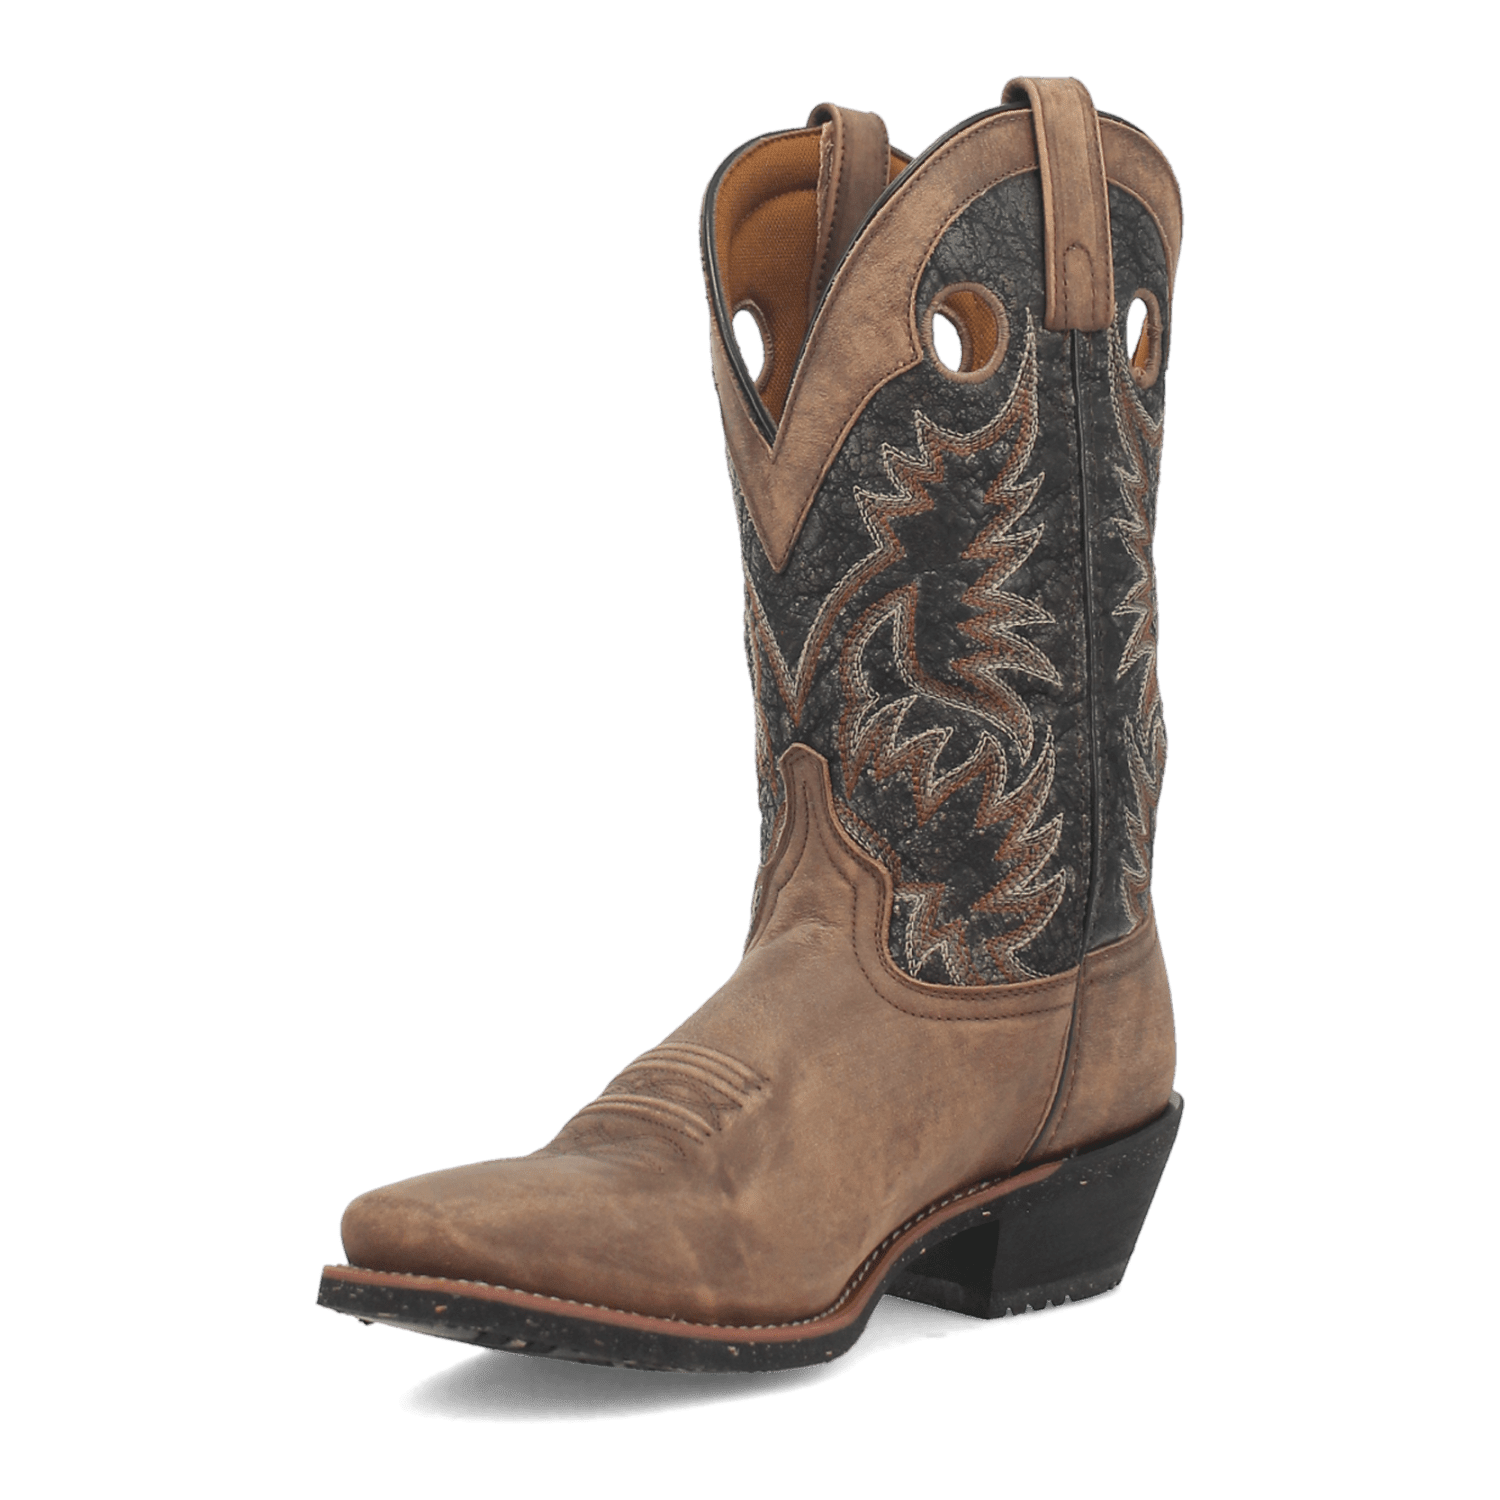 STILLWATER LEATHER BOOT Image